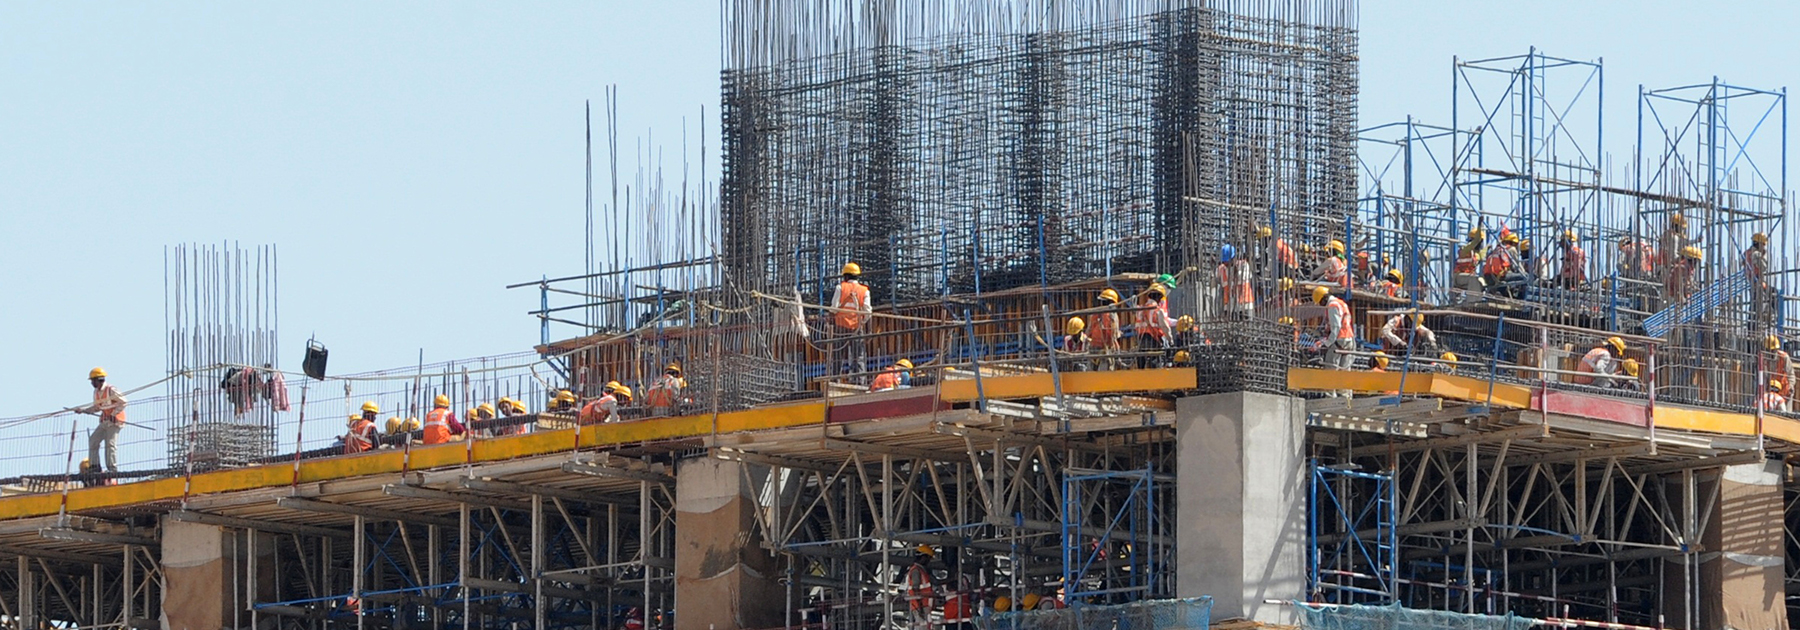 Under construction residential buildings rise into the skyline of Mumbai. (PUNIT PARANJPE/AFP/Getty Images)